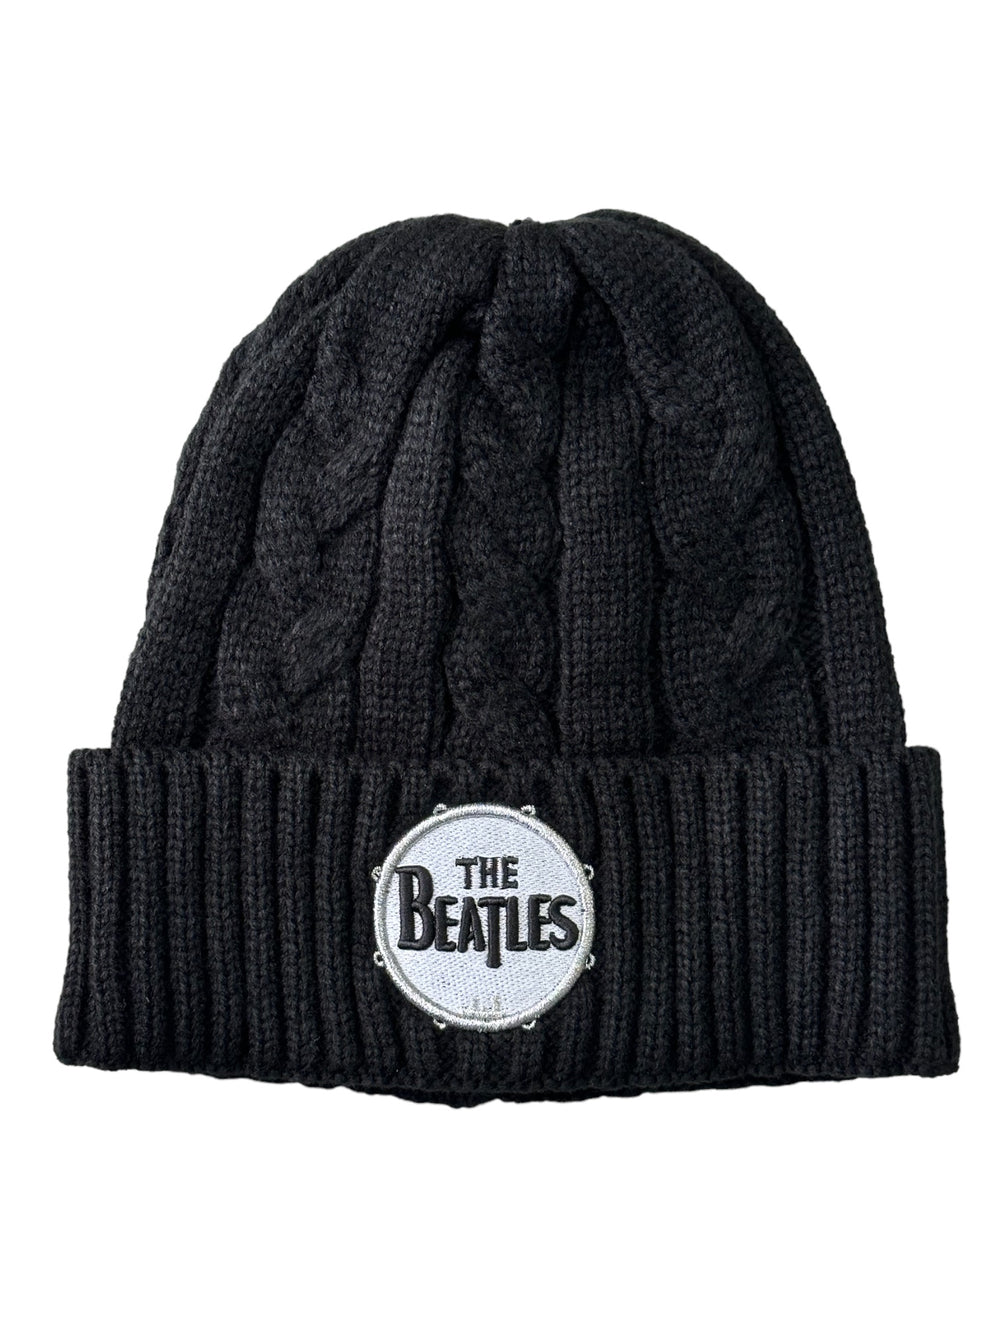 Beatles The Official Drum Logo Cable-Knit Beanie Hat One Size Fits All - NEW